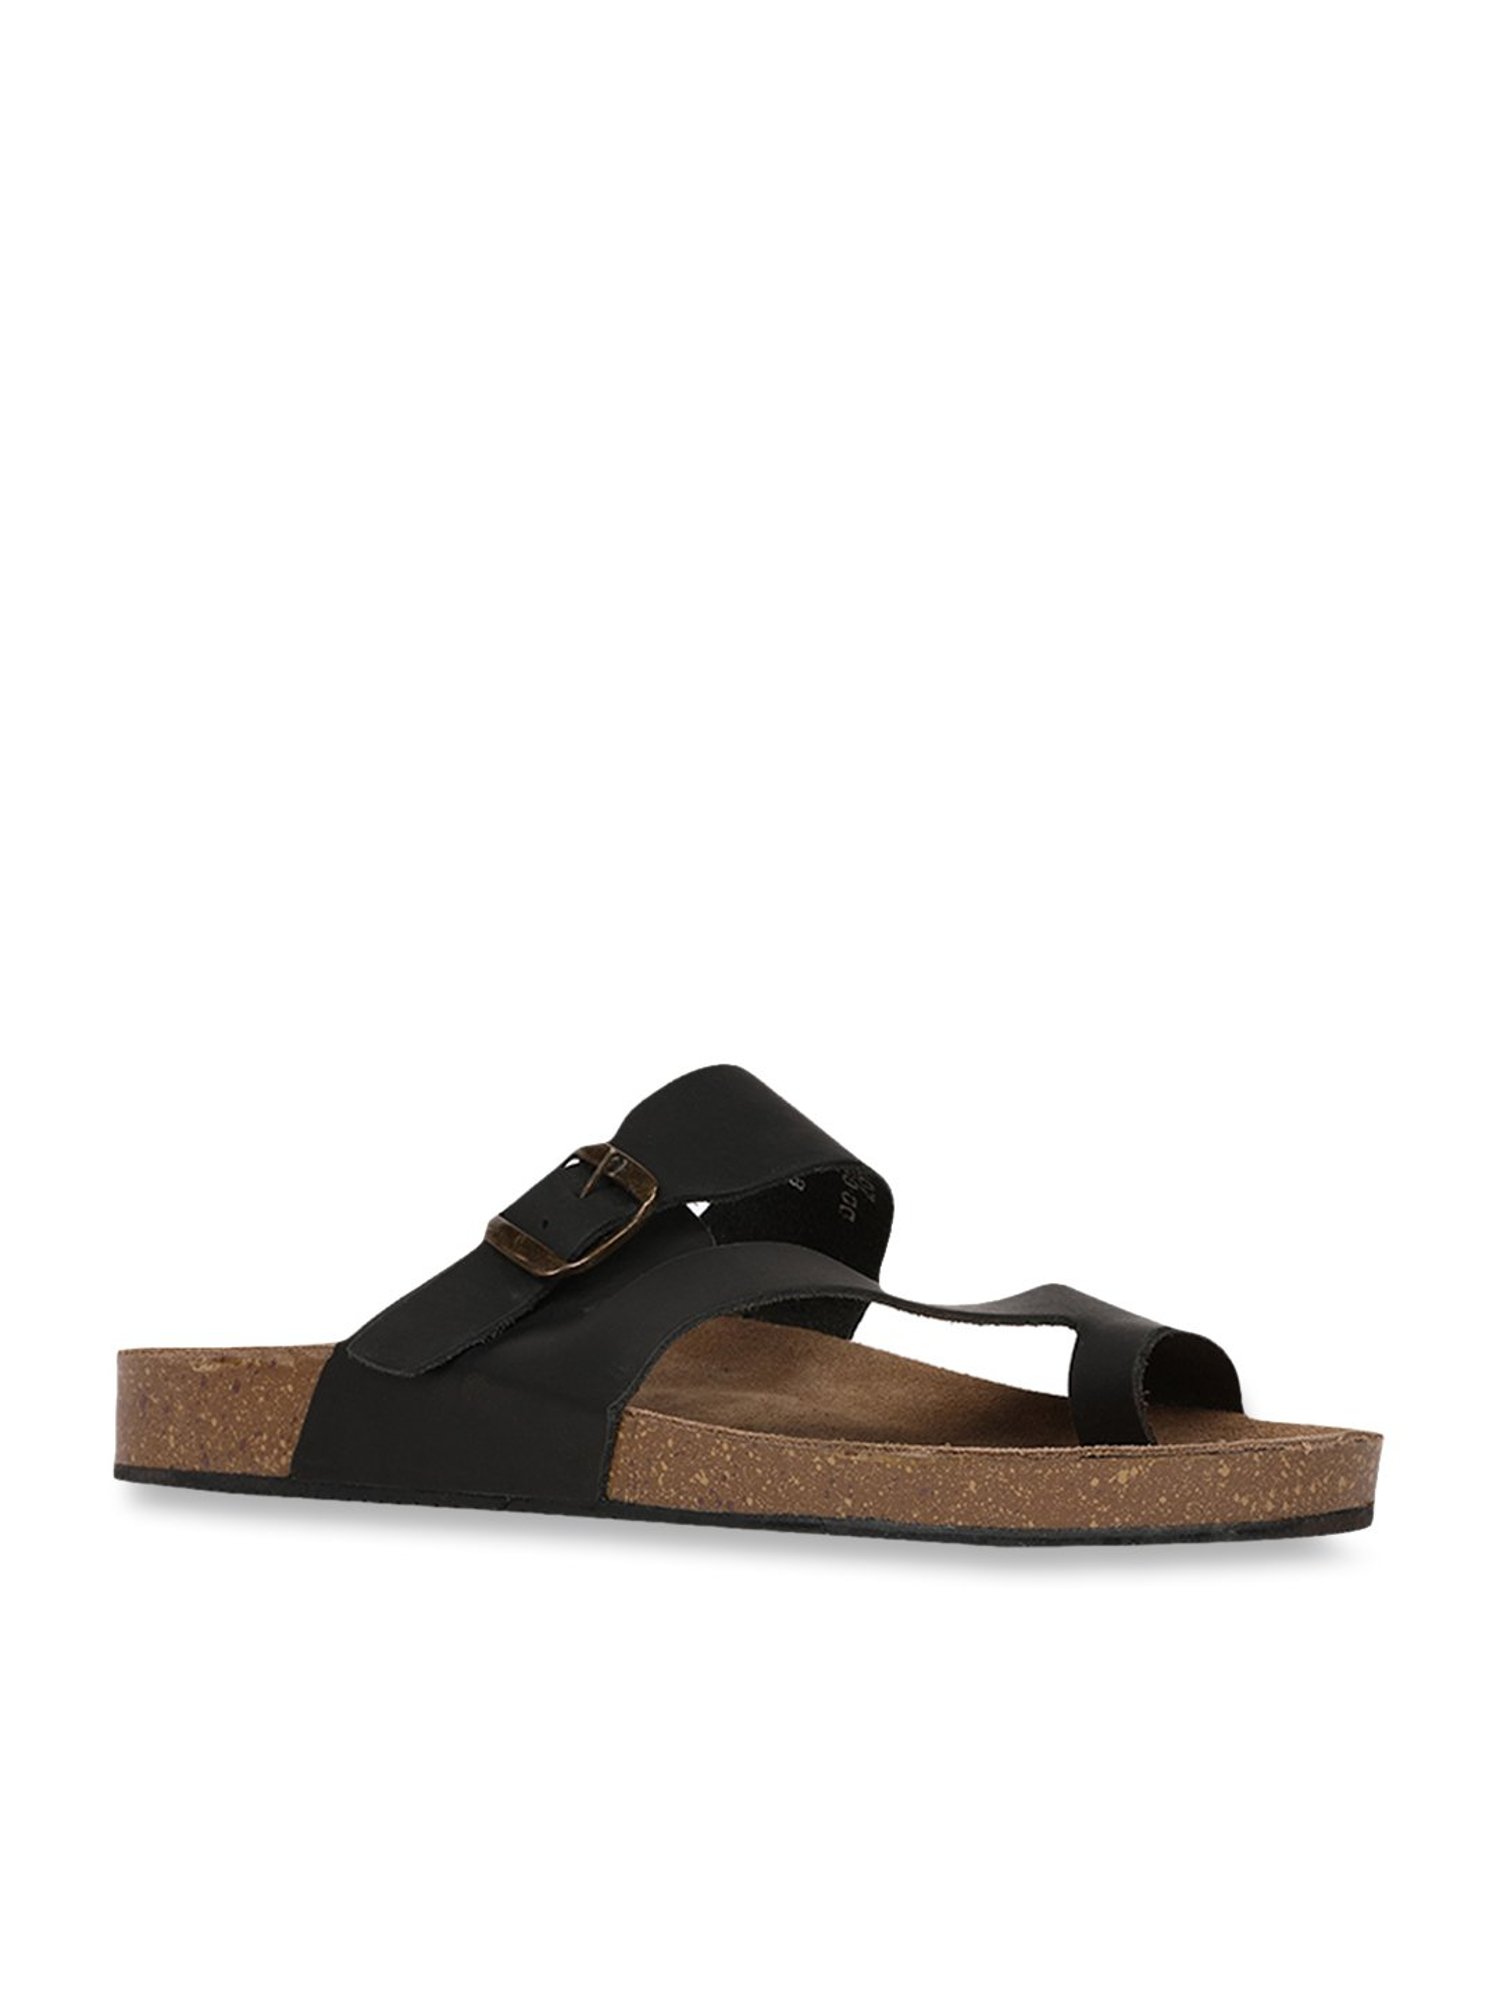 2021 Lowest Price] Bata Men Black Flats Sandal Price in India &  Specifications